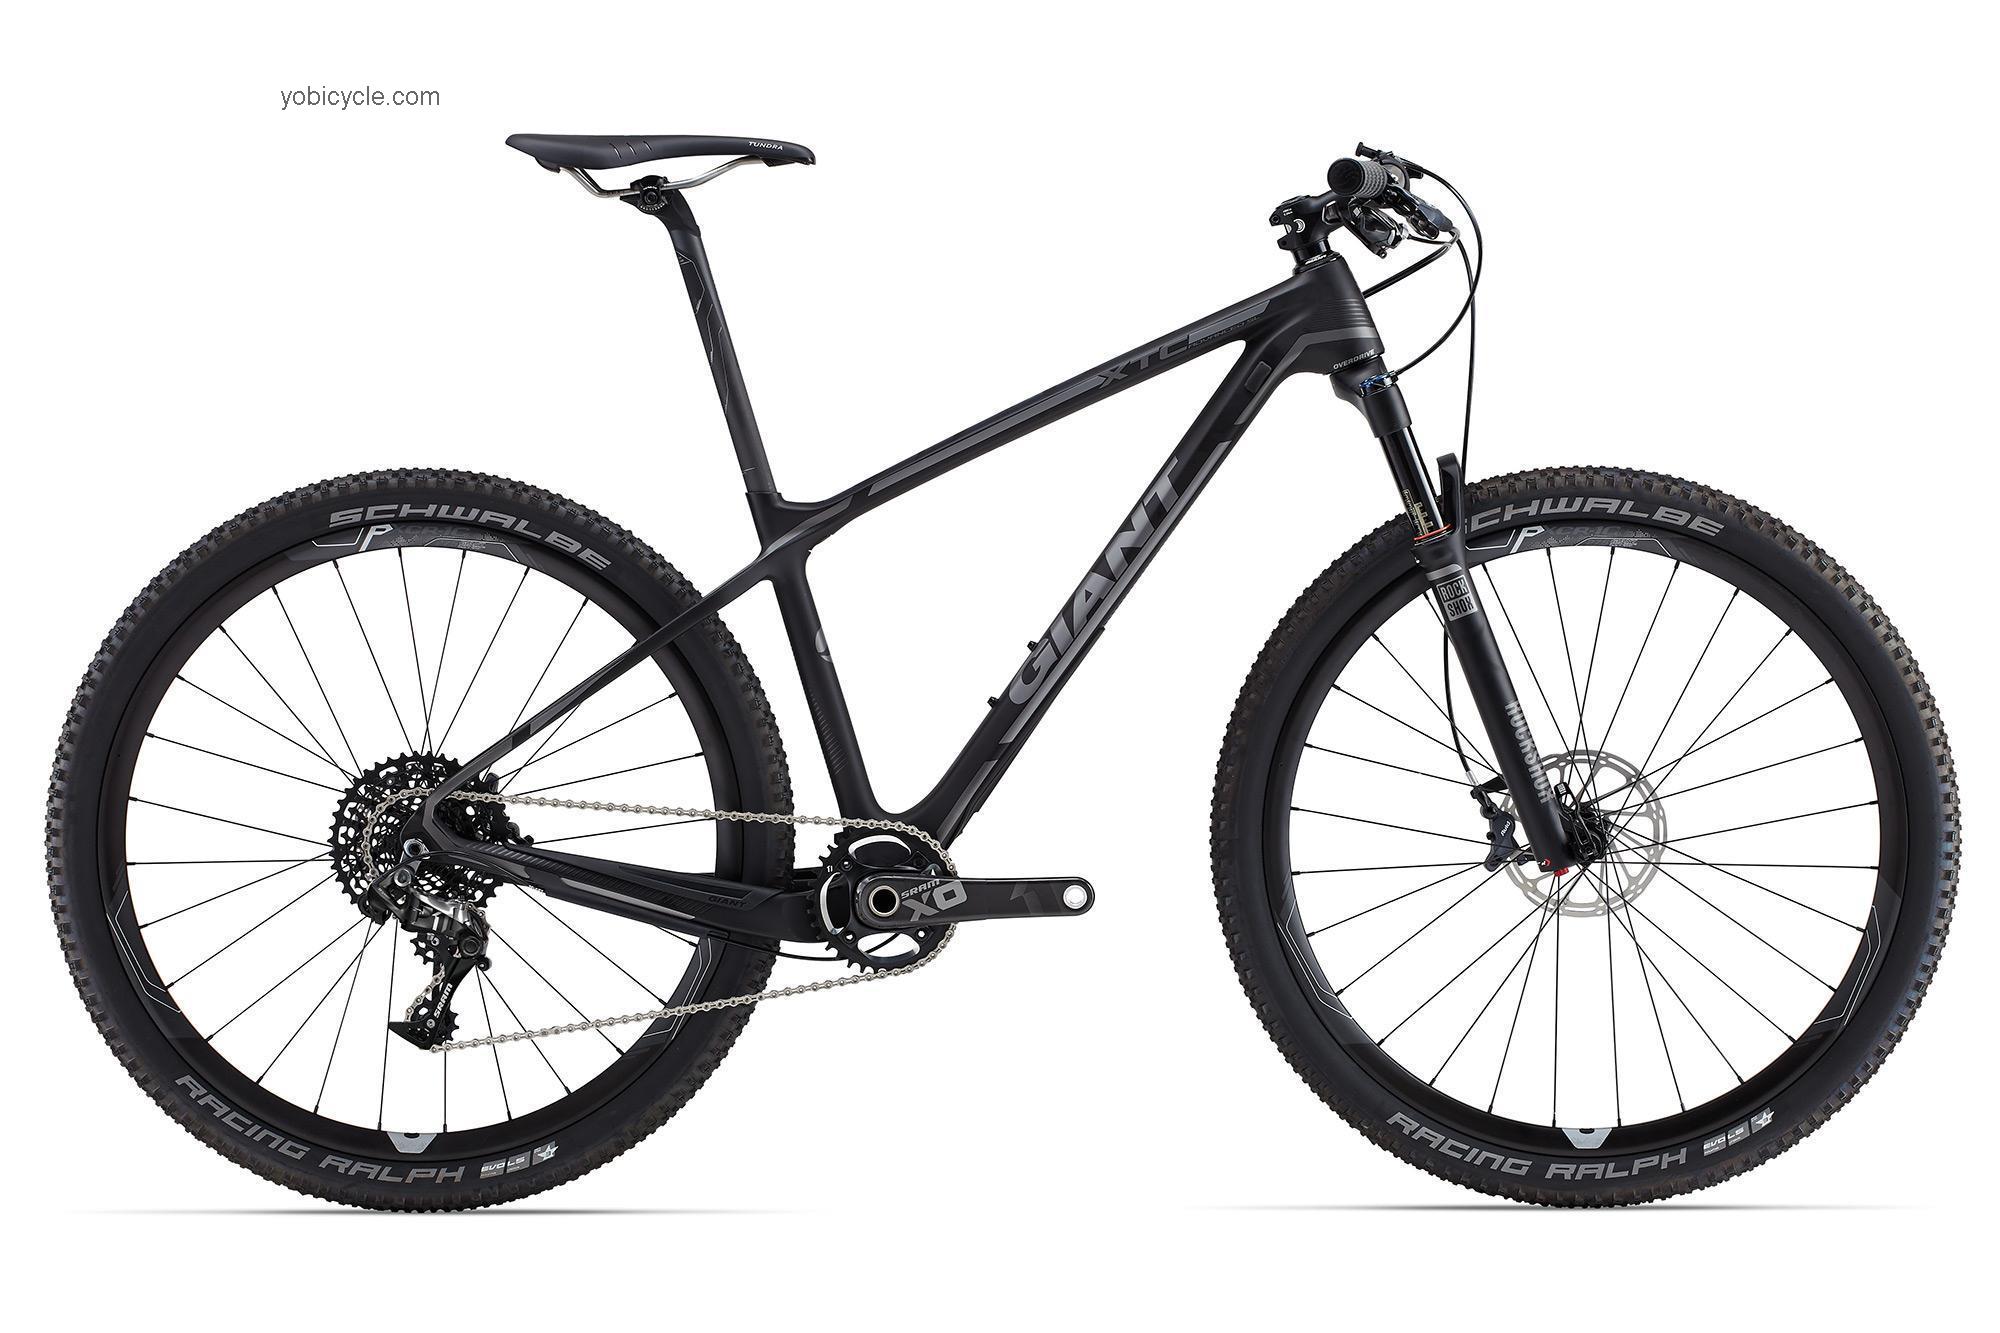 Giant XTC Advanced SL 27.5 1 2015 comparison online with competitors